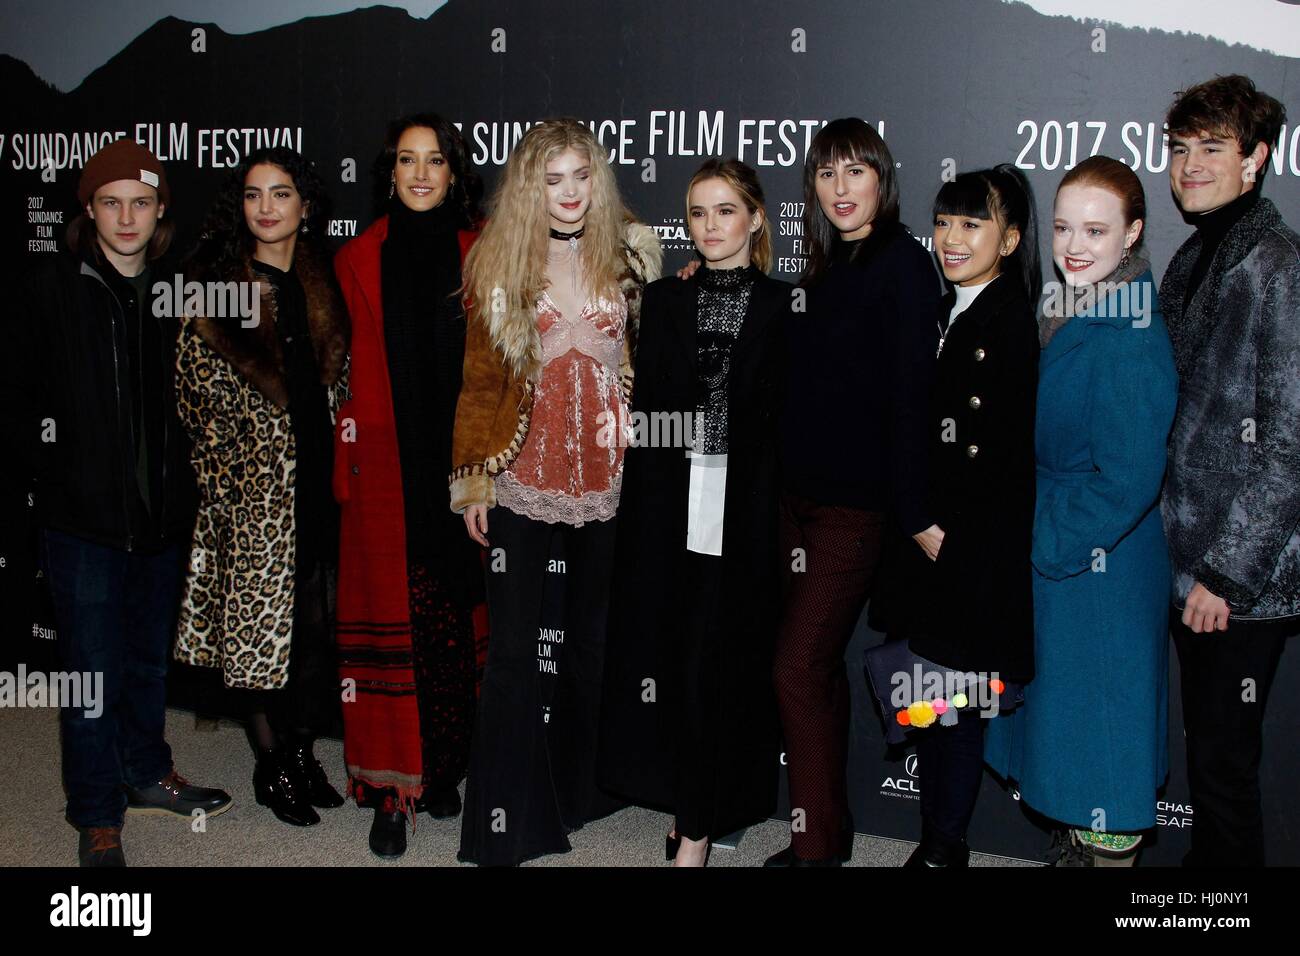 Utah, USA. 21st, January, 2017. Logan Miller, Medalion Rahimi, Jennifer Beals, Elena Kampouris, Zoey Deutch, Ry Russo-Young, Cynthy Wu, Liv Hewson, Kian Lawley at arrivals for Before I Fall Premiere at Sundance Film Festival 2017, Eccles Theatre in Utah, USA. Credit: James Atoa/Everett Collection/Alamy Live News Stock Photo